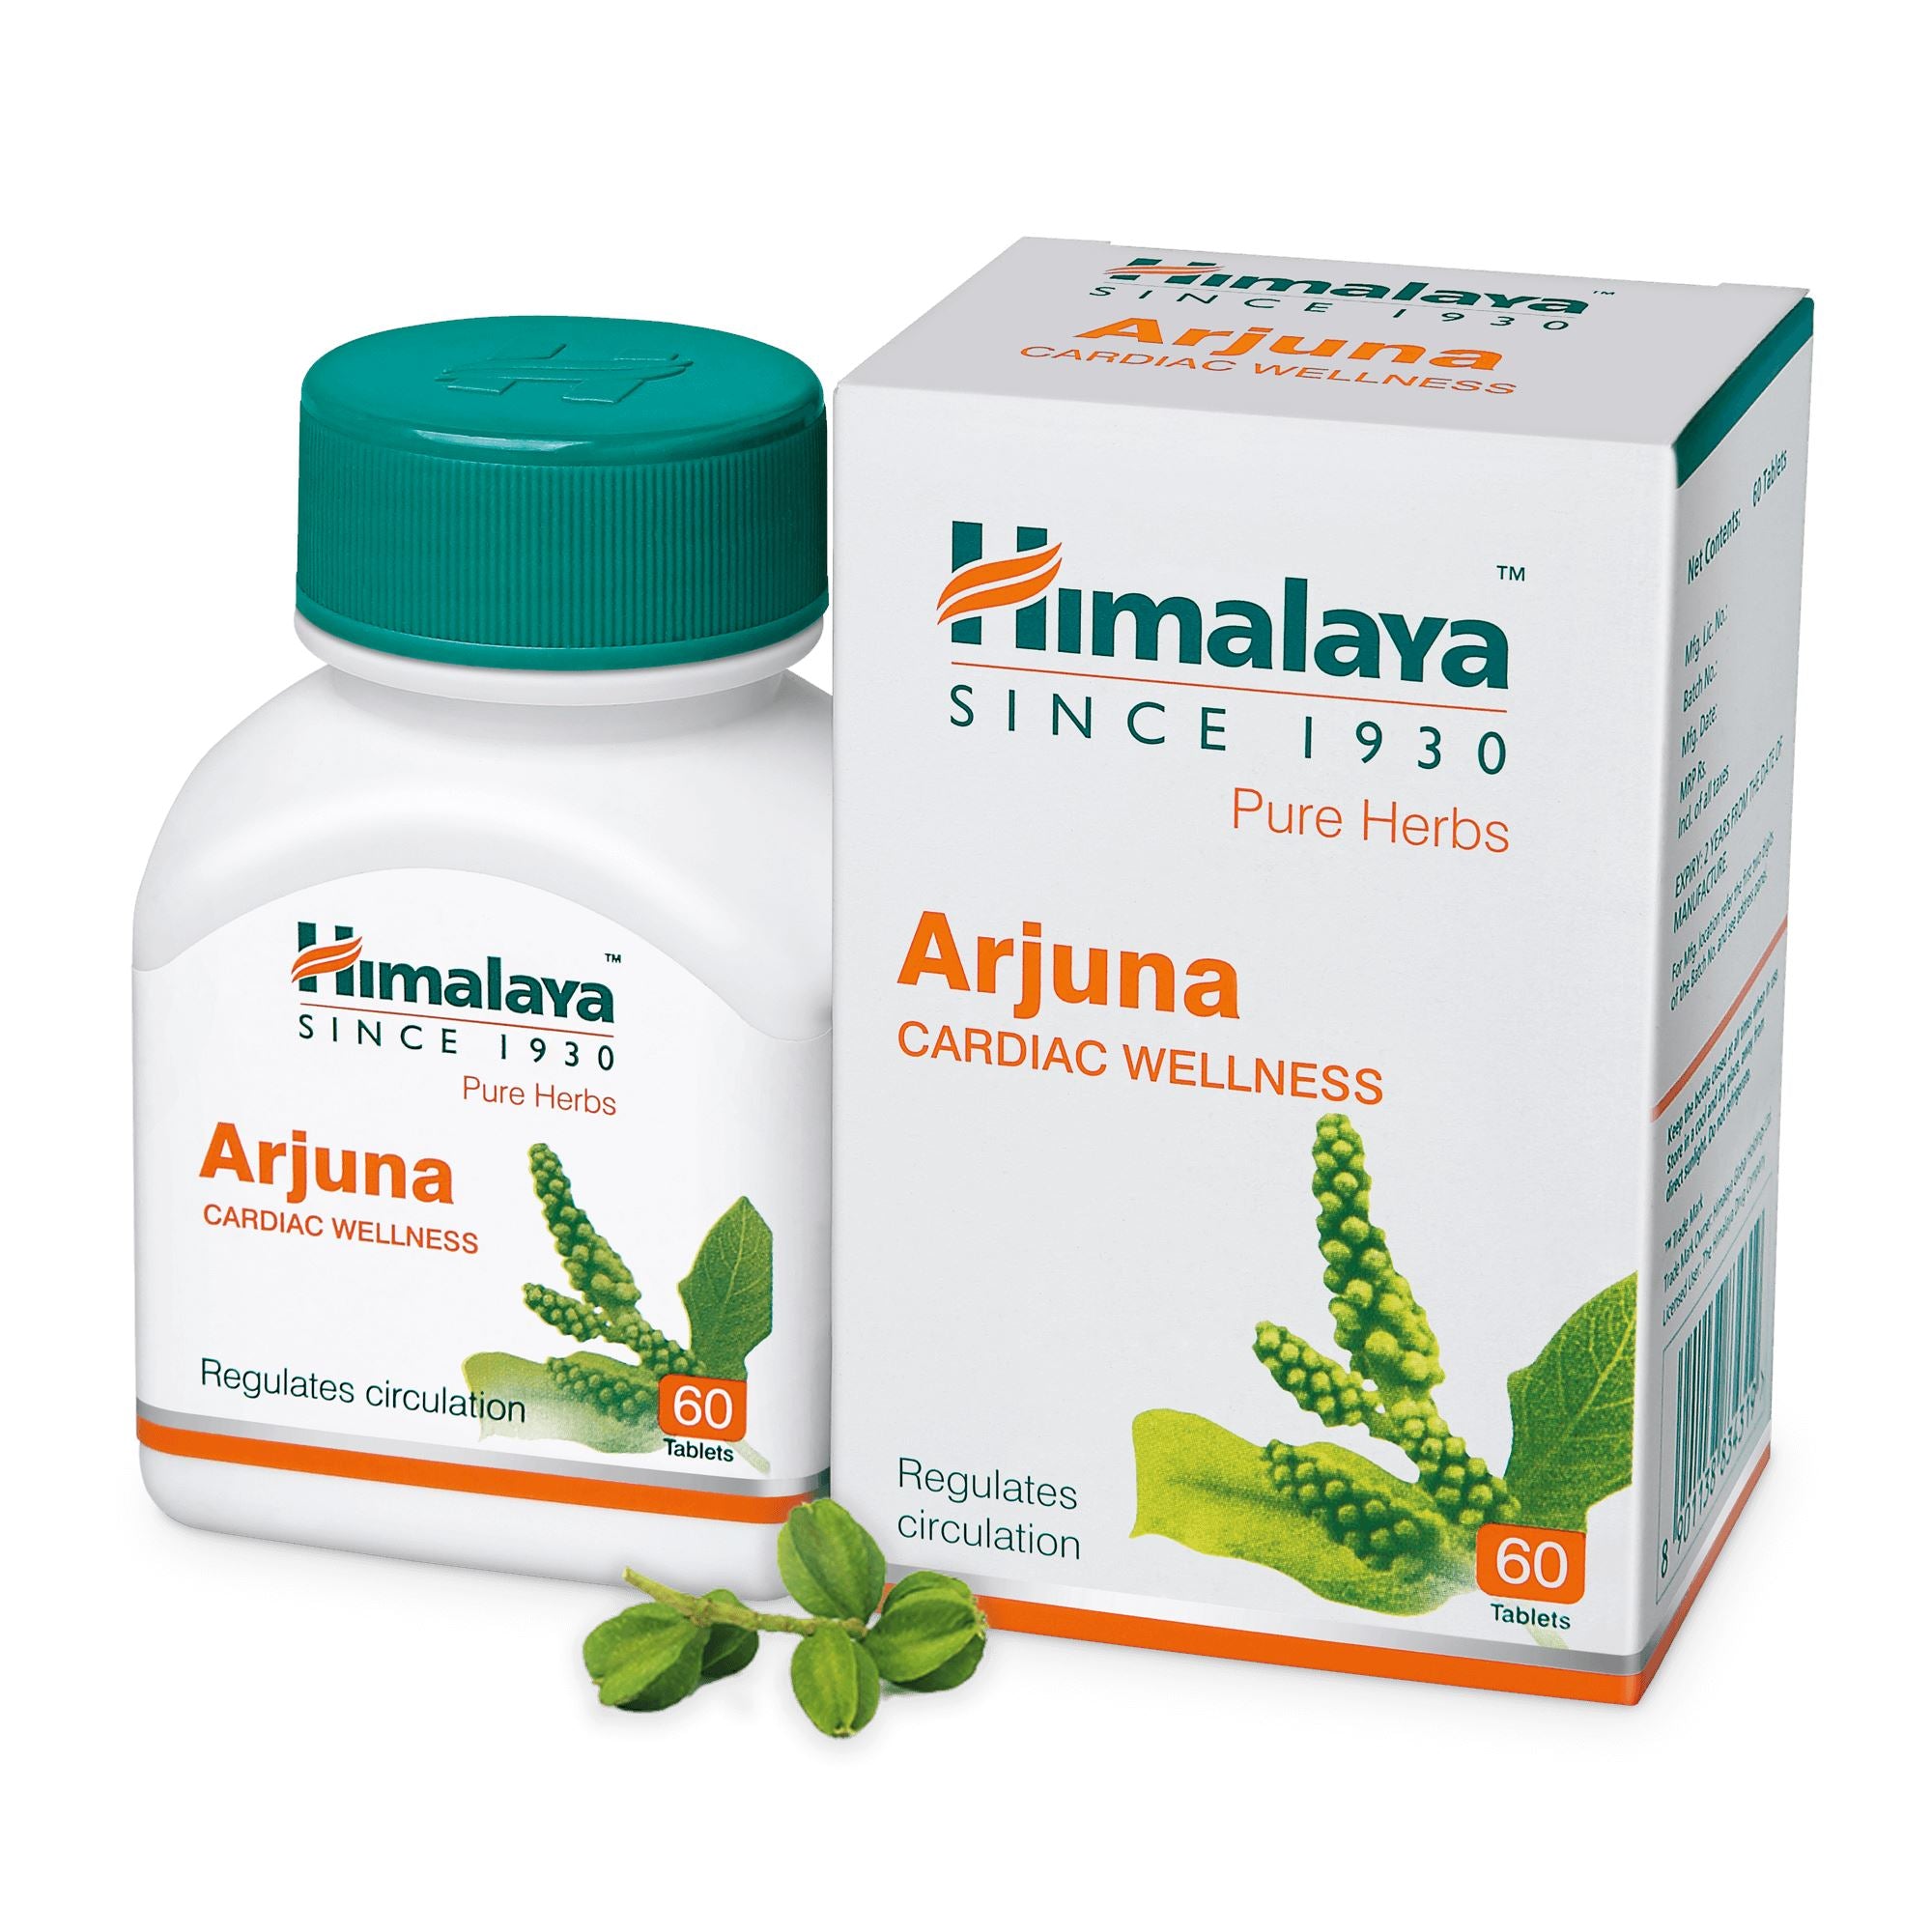 Himalaya Liv.52 Ds Tablets (90's) : Buy Online at Best Price in KSA - Souq  is now : Health